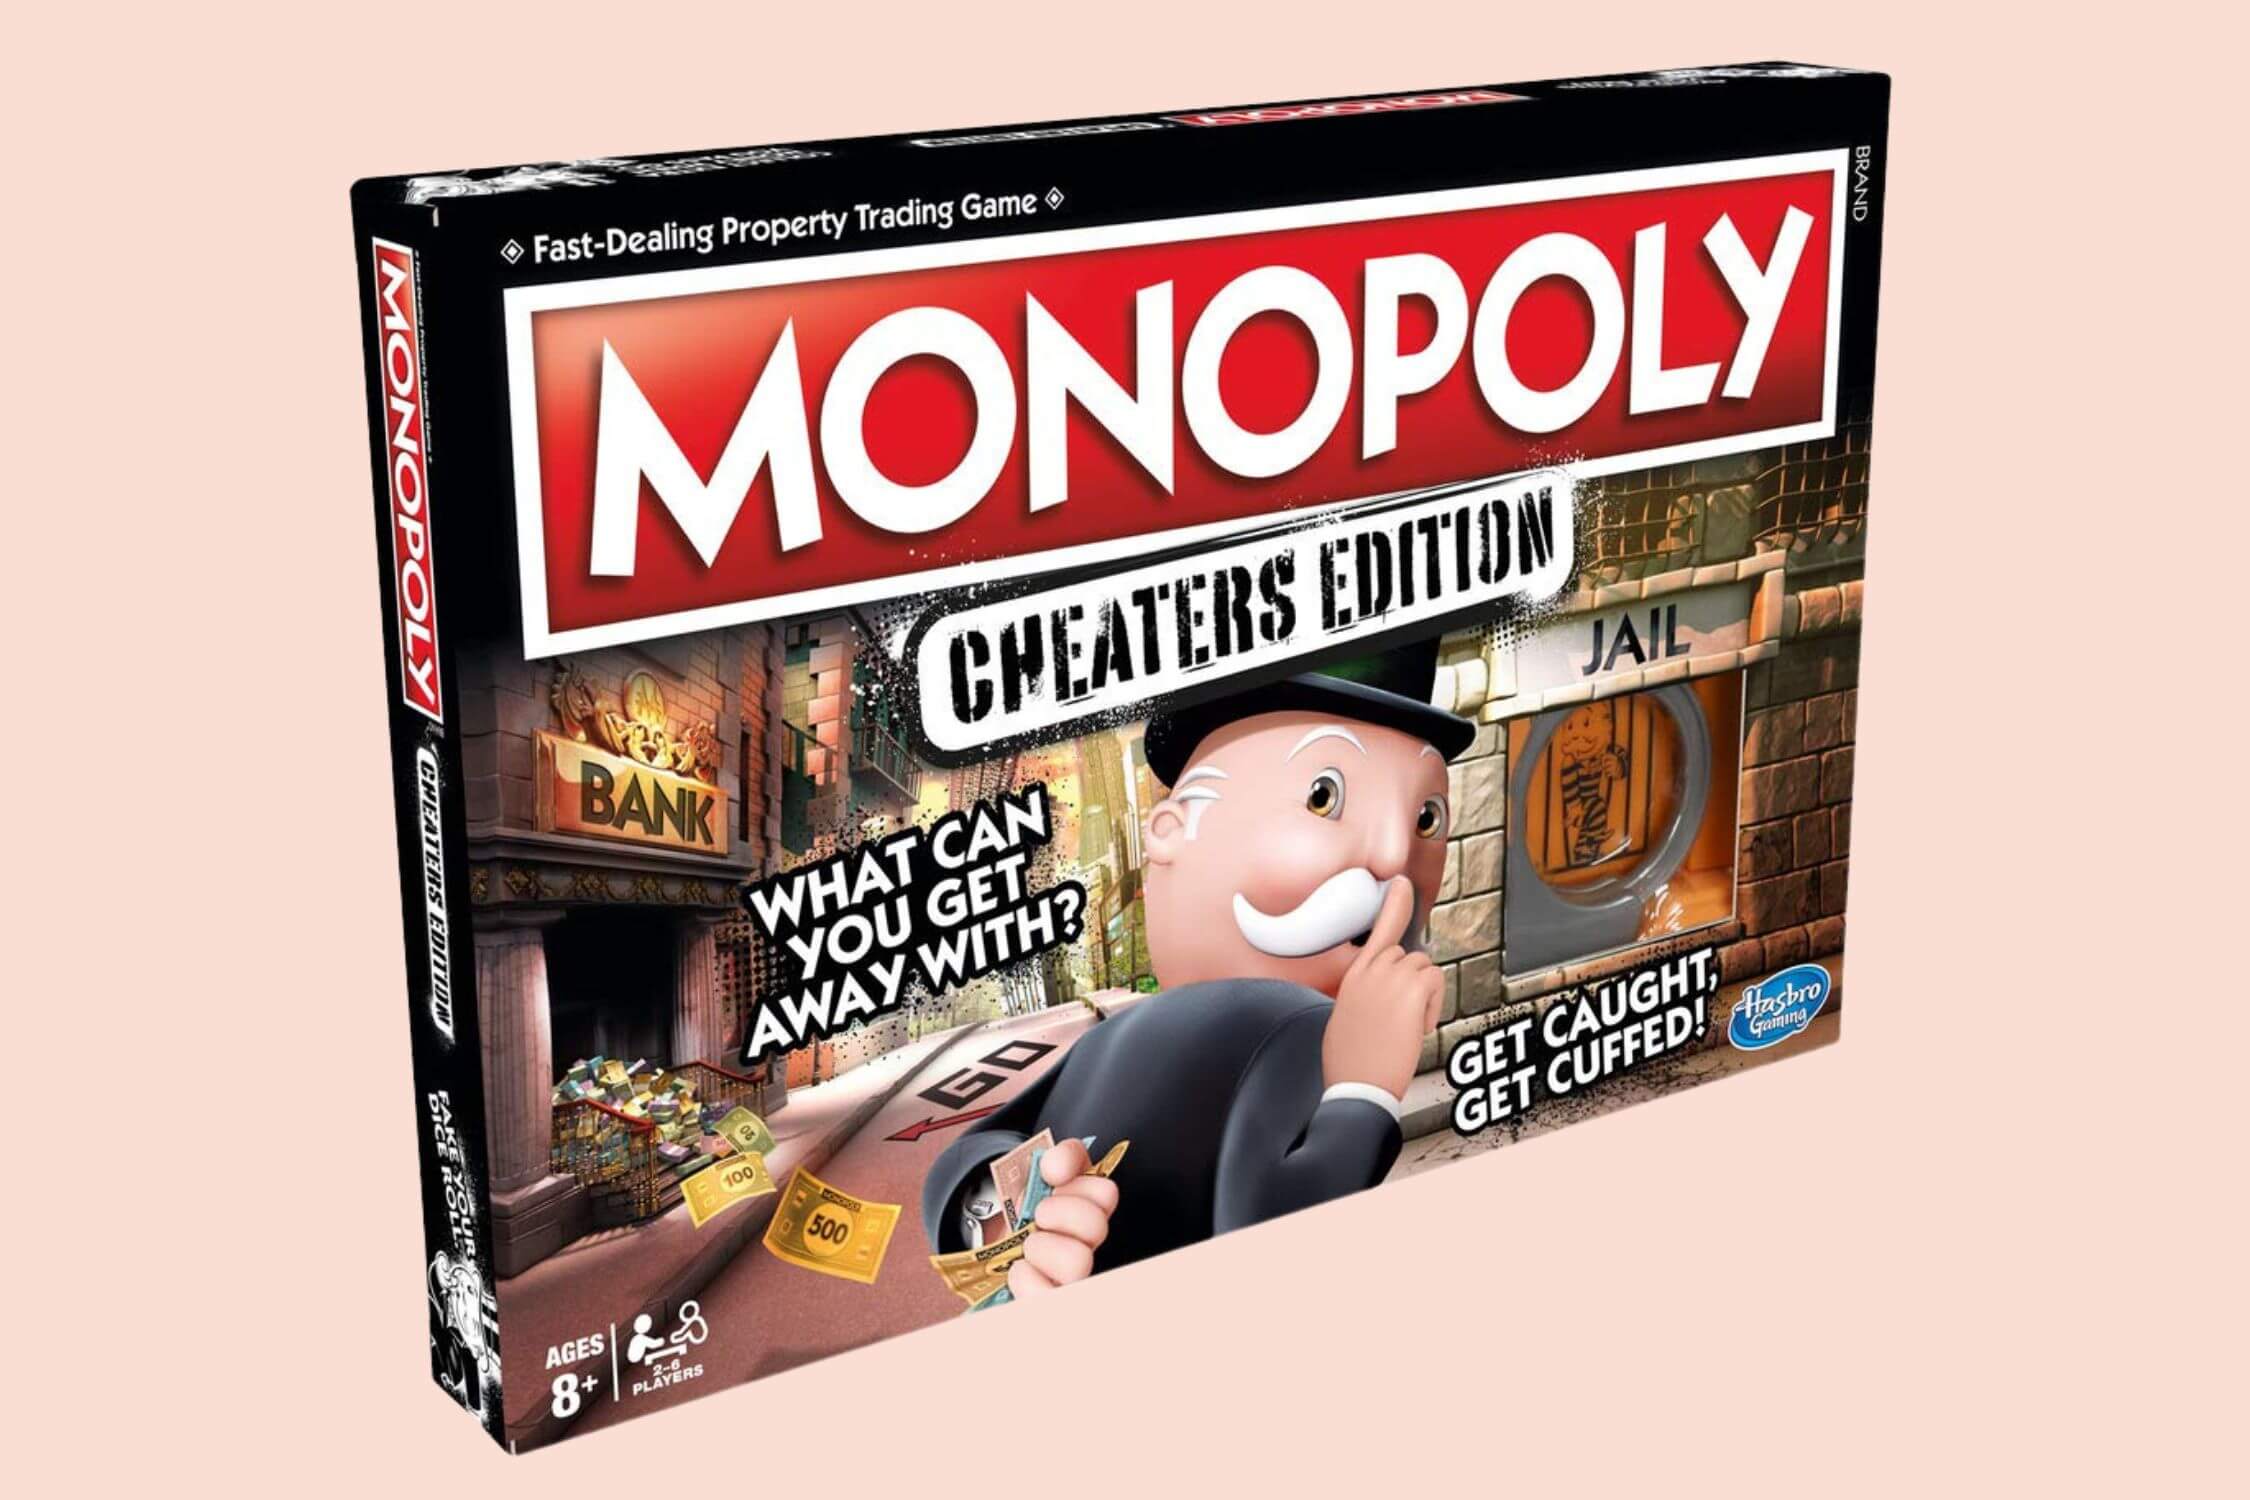 Monopoly Cheaters Edition - Cheat your way into power